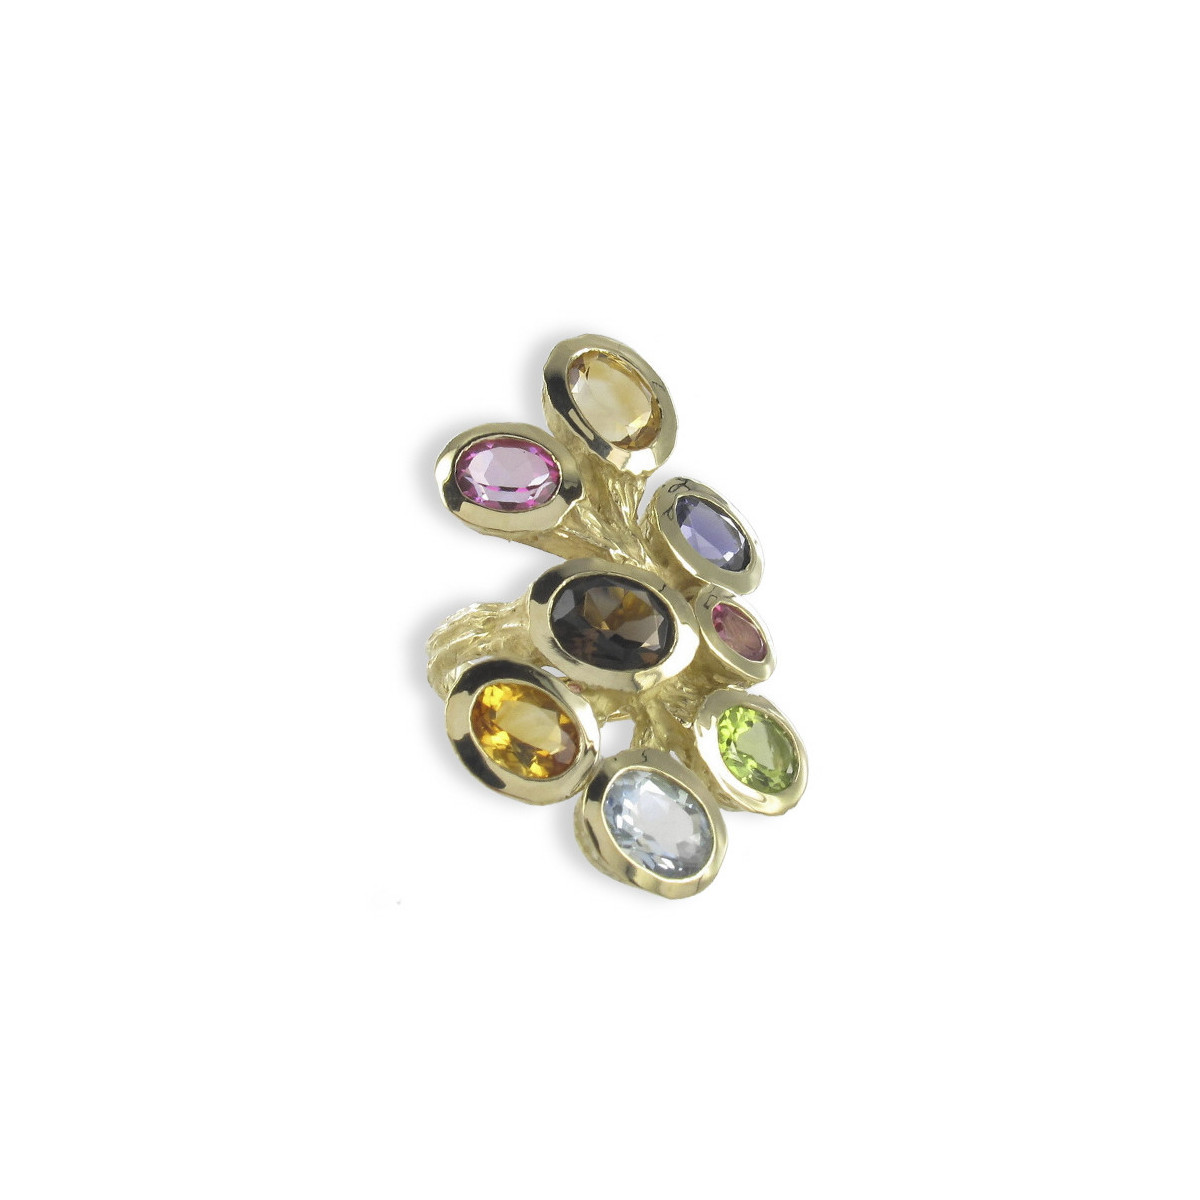 WIDE GOLD RING WITH 8 STONES